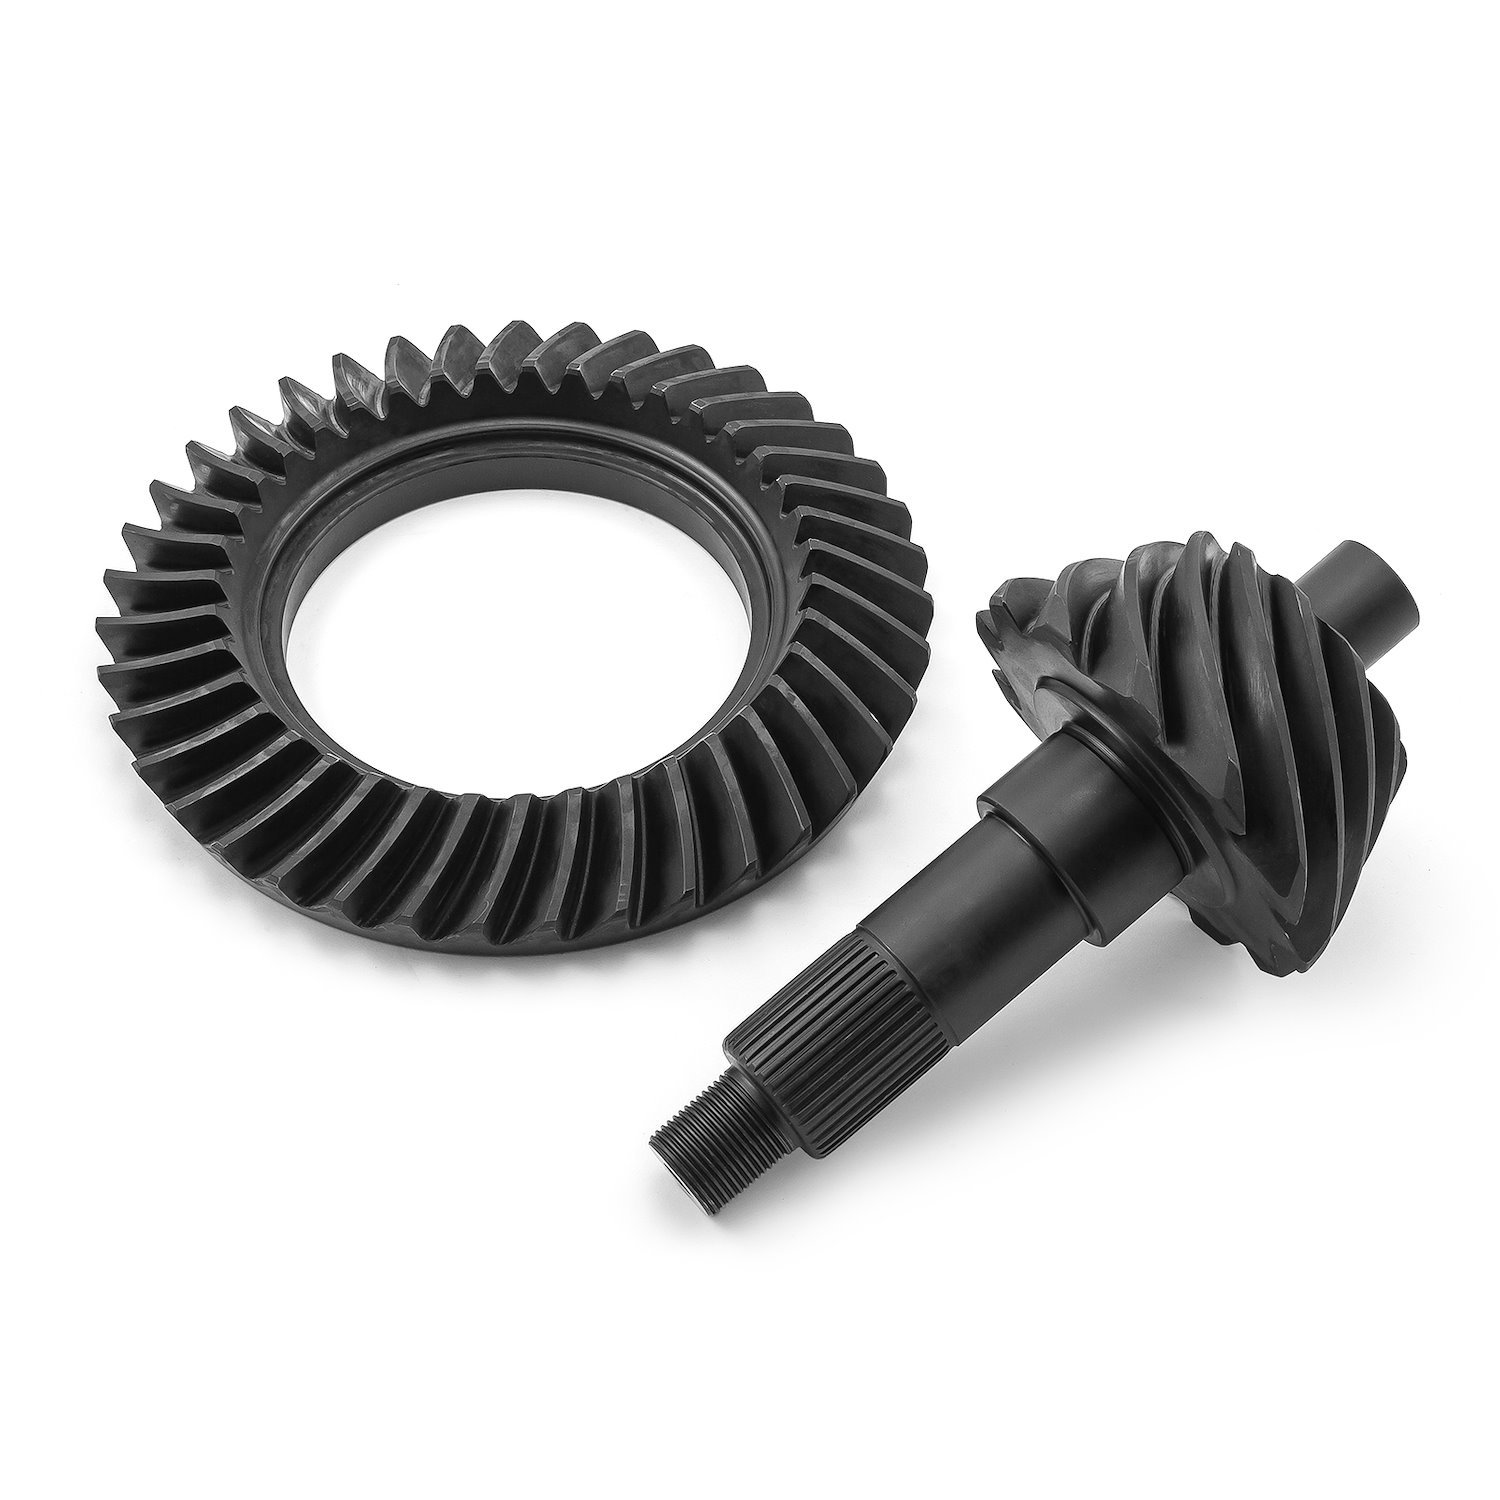 PCE211.1040 Ford 9 in. 35 Spline 3.25:1 Ratio Ring and Pinion Gears Set 8620